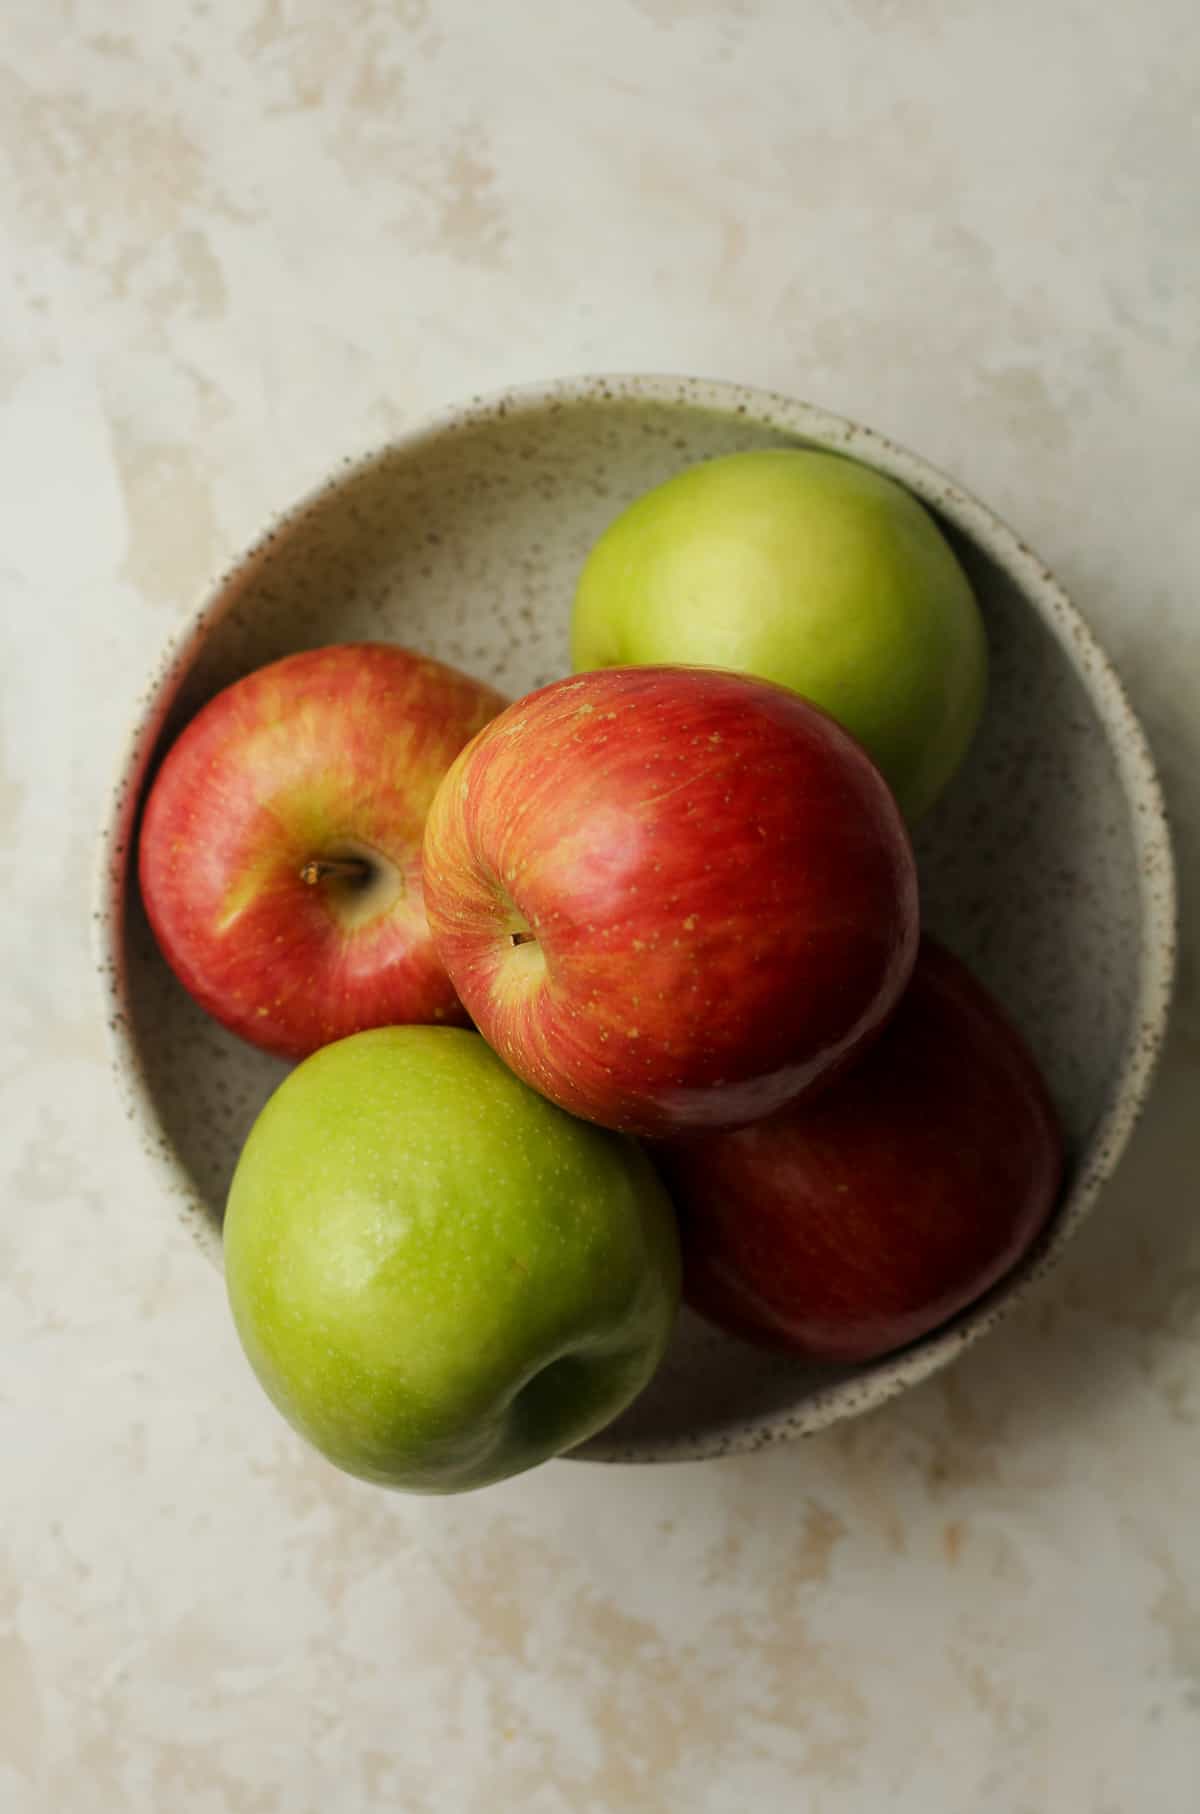 A bowl of the red and green apples.